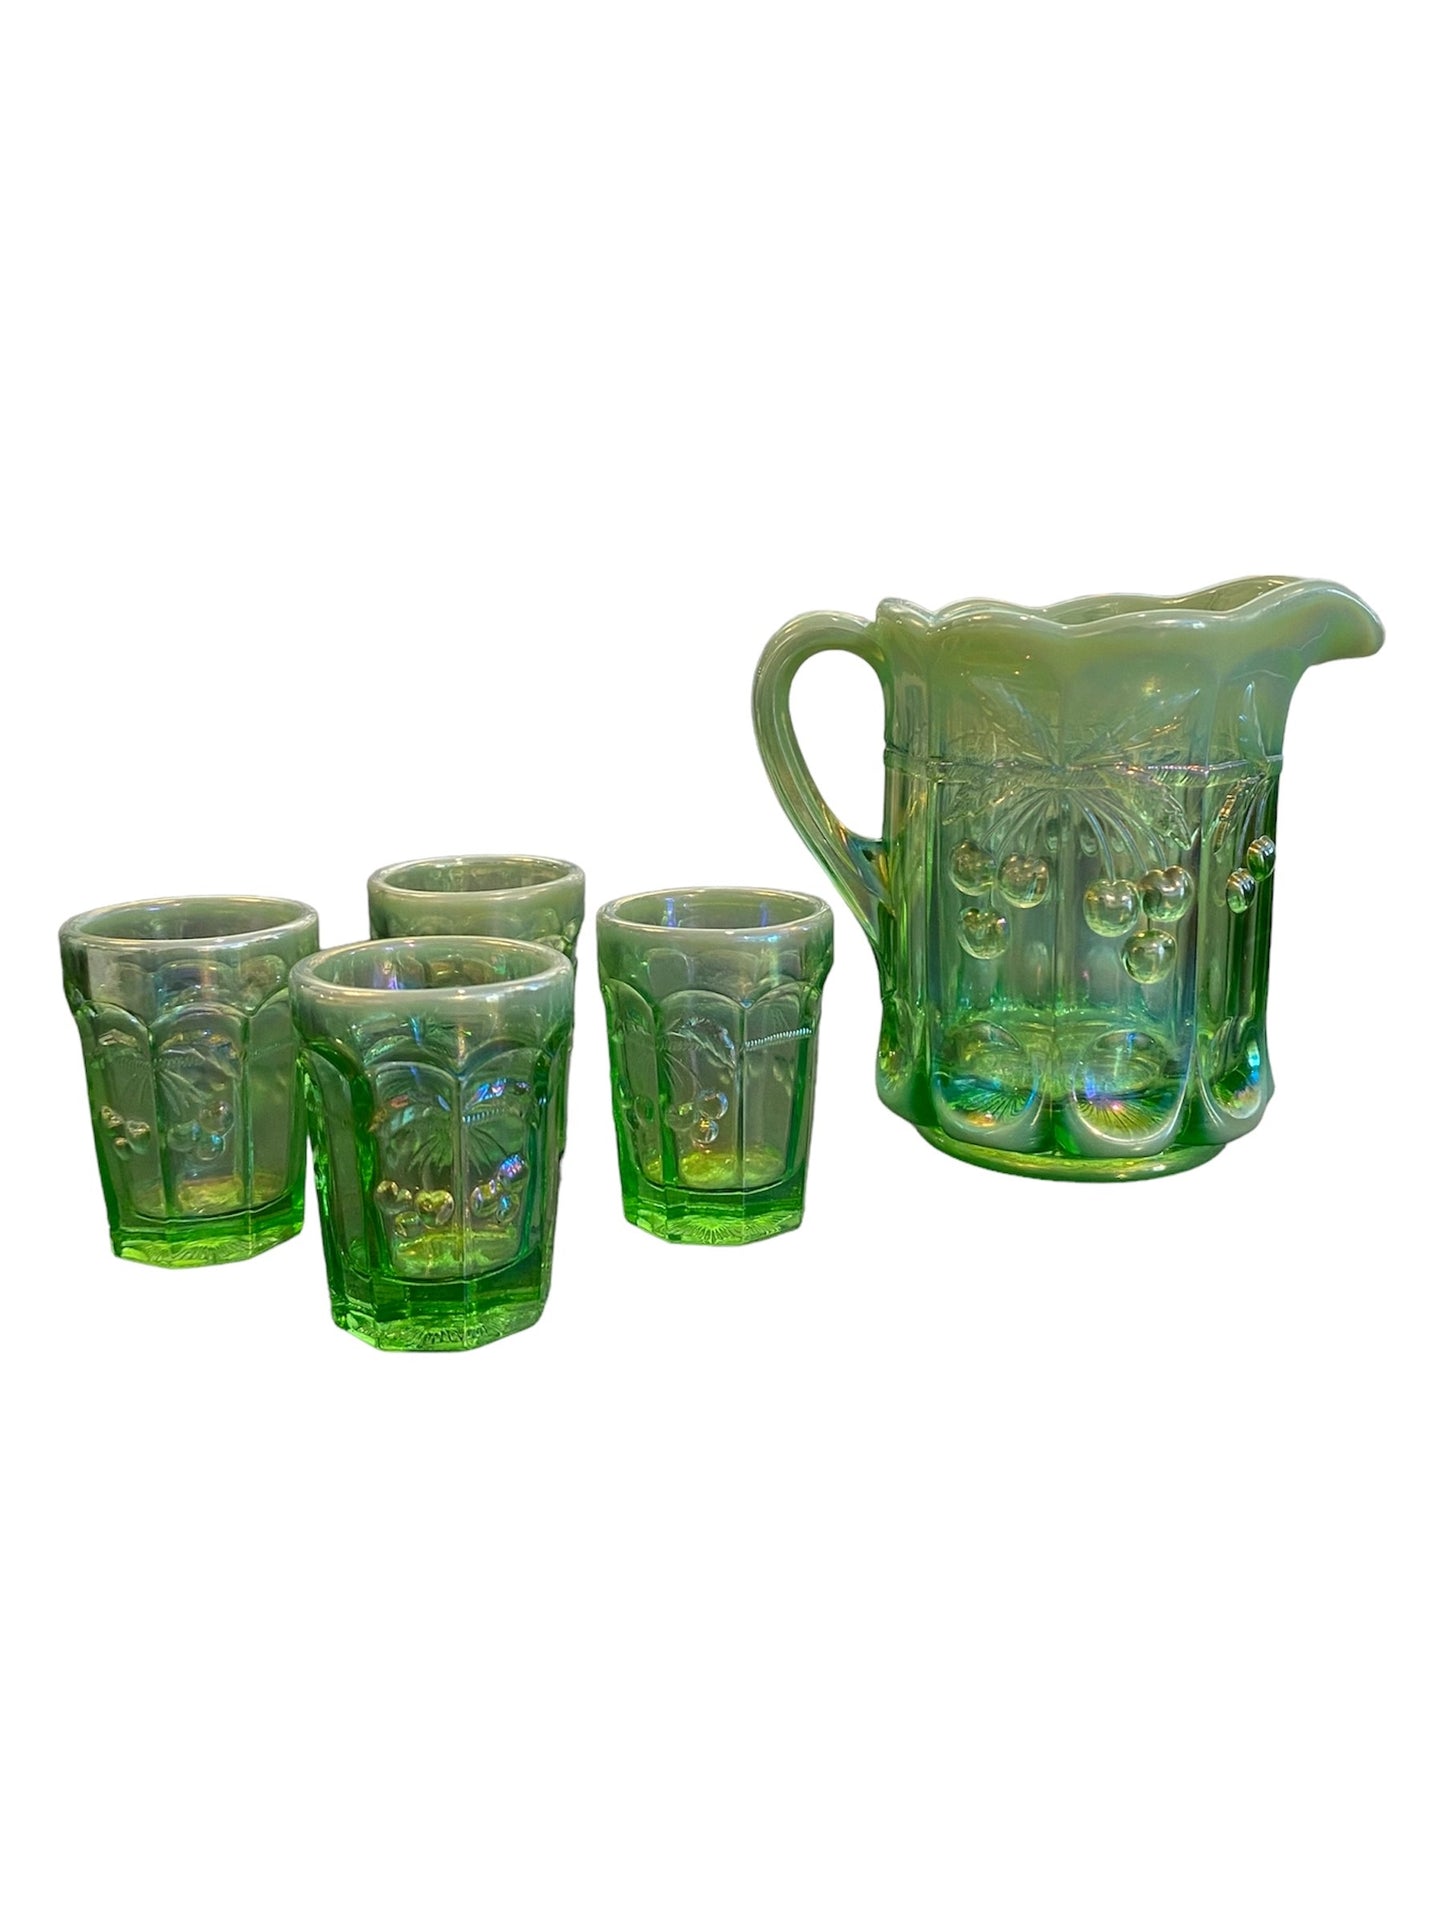 Vintage Mosser Green Opalescent Cherry Glasses and Pitcher